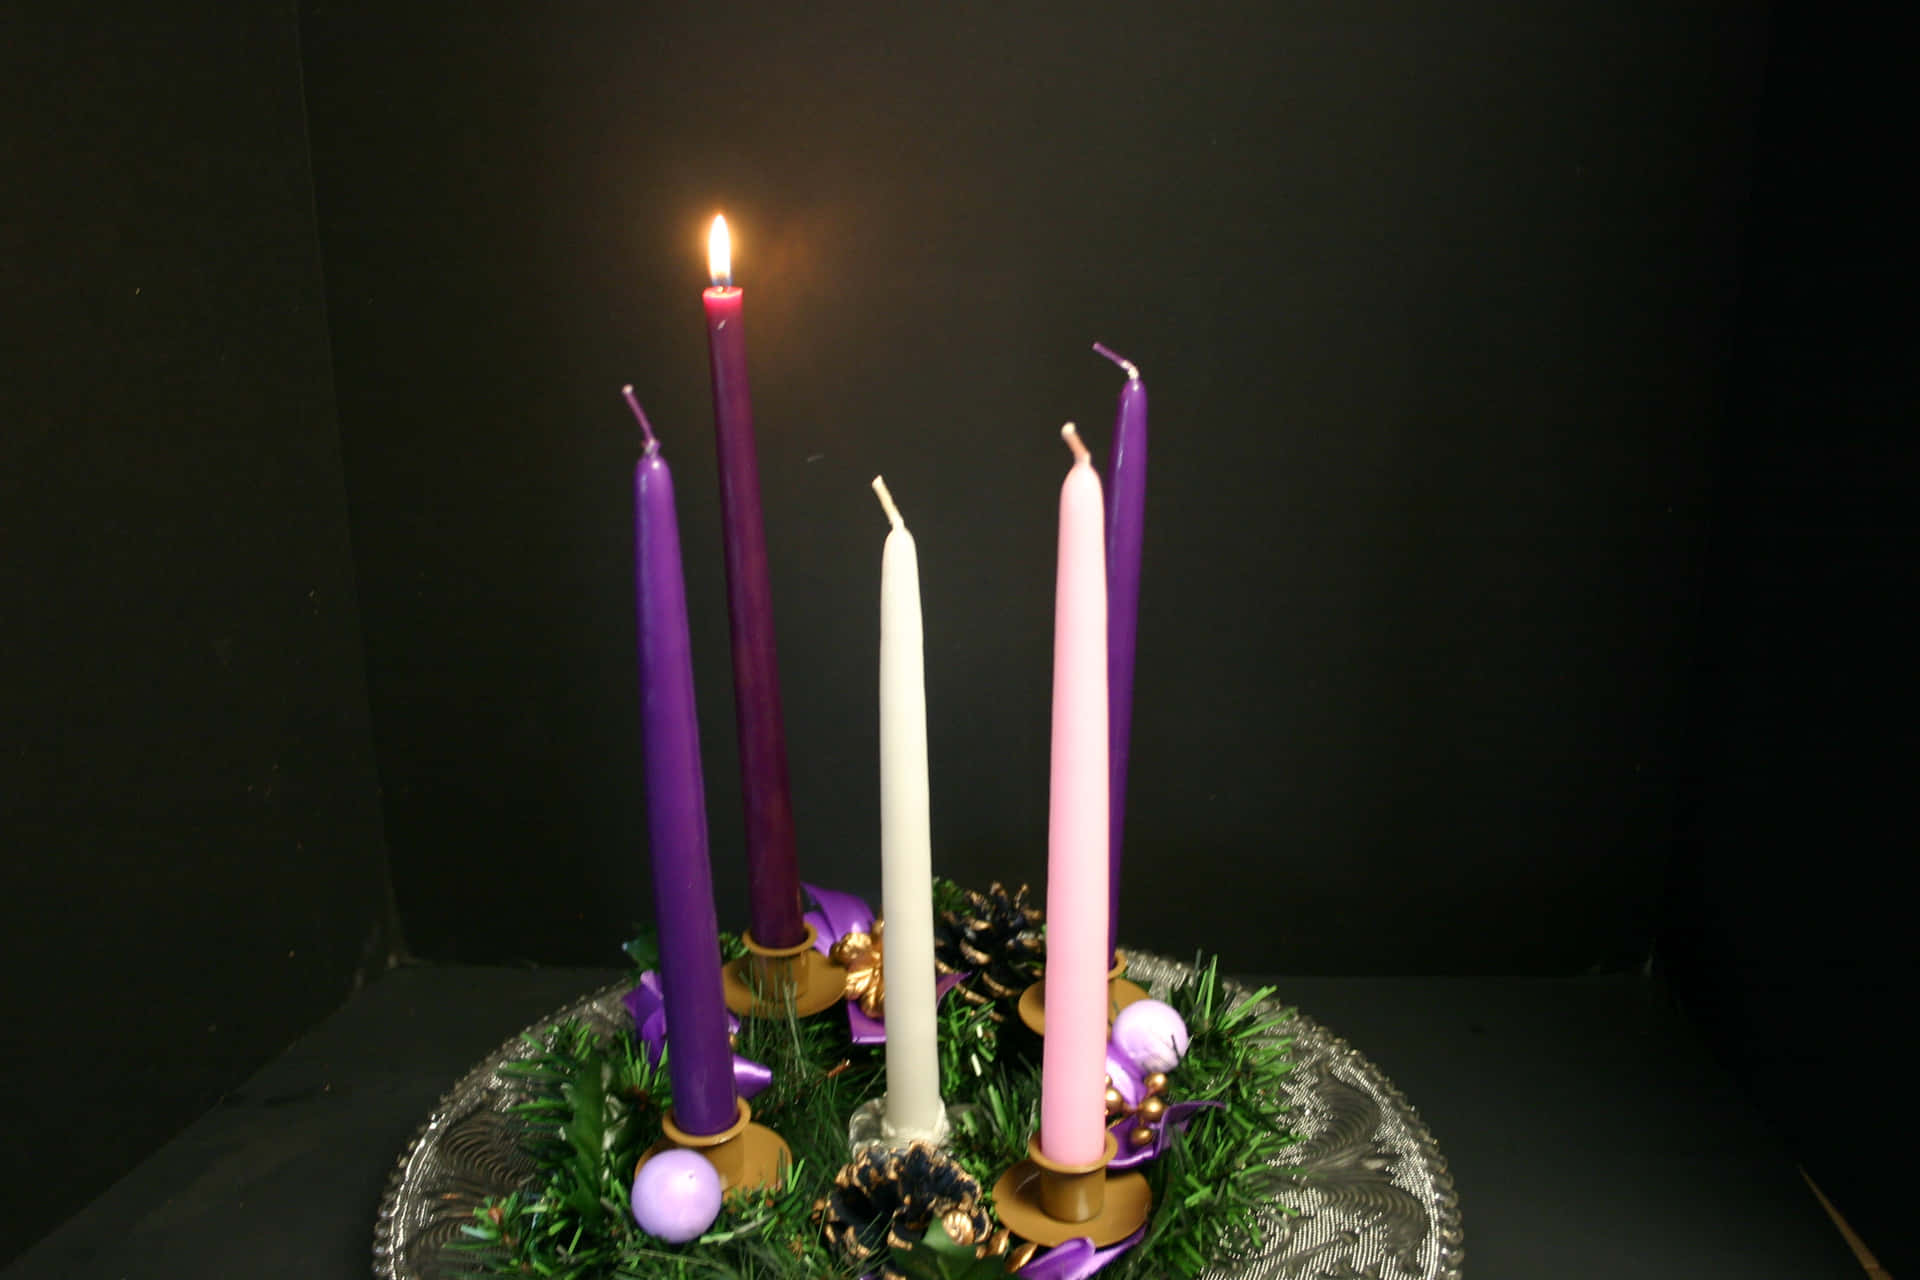 A Warm Welcome To The First Sunday Of Advent Wallpaper